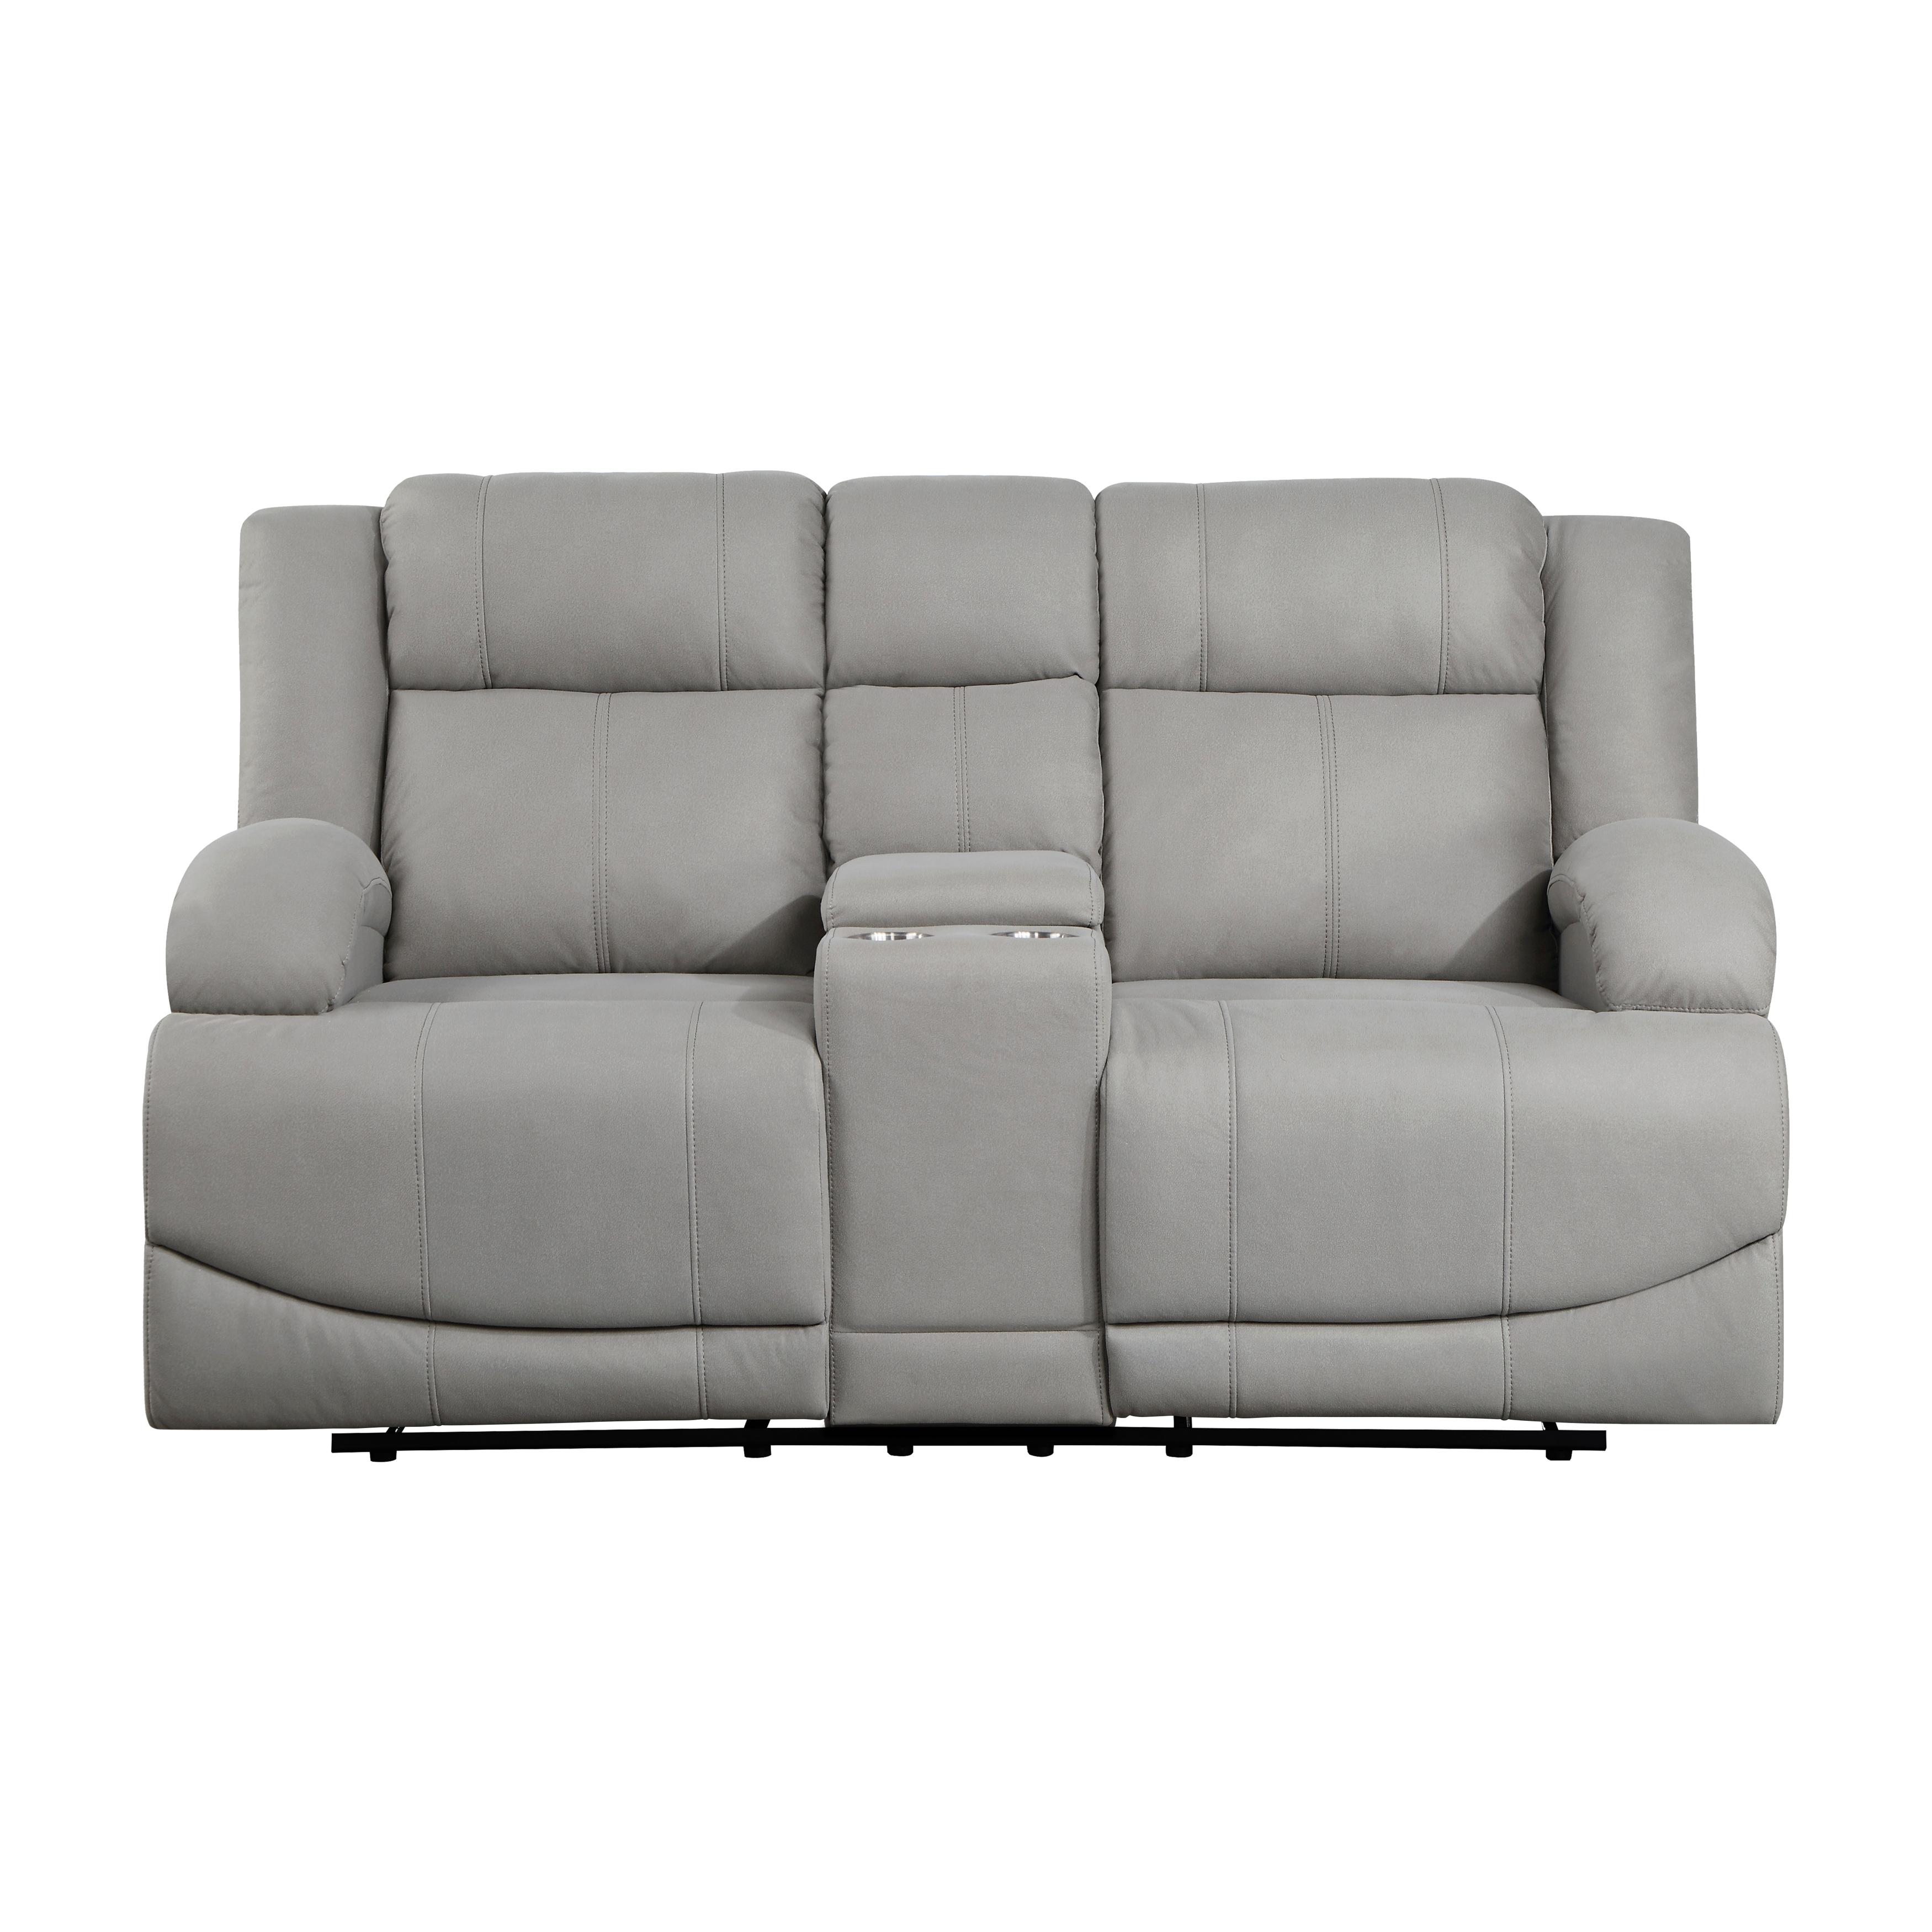 Transitional Reclining Loveseat 9207GRY-2 Camryn 9207GRY-2 in Gray Microfiber